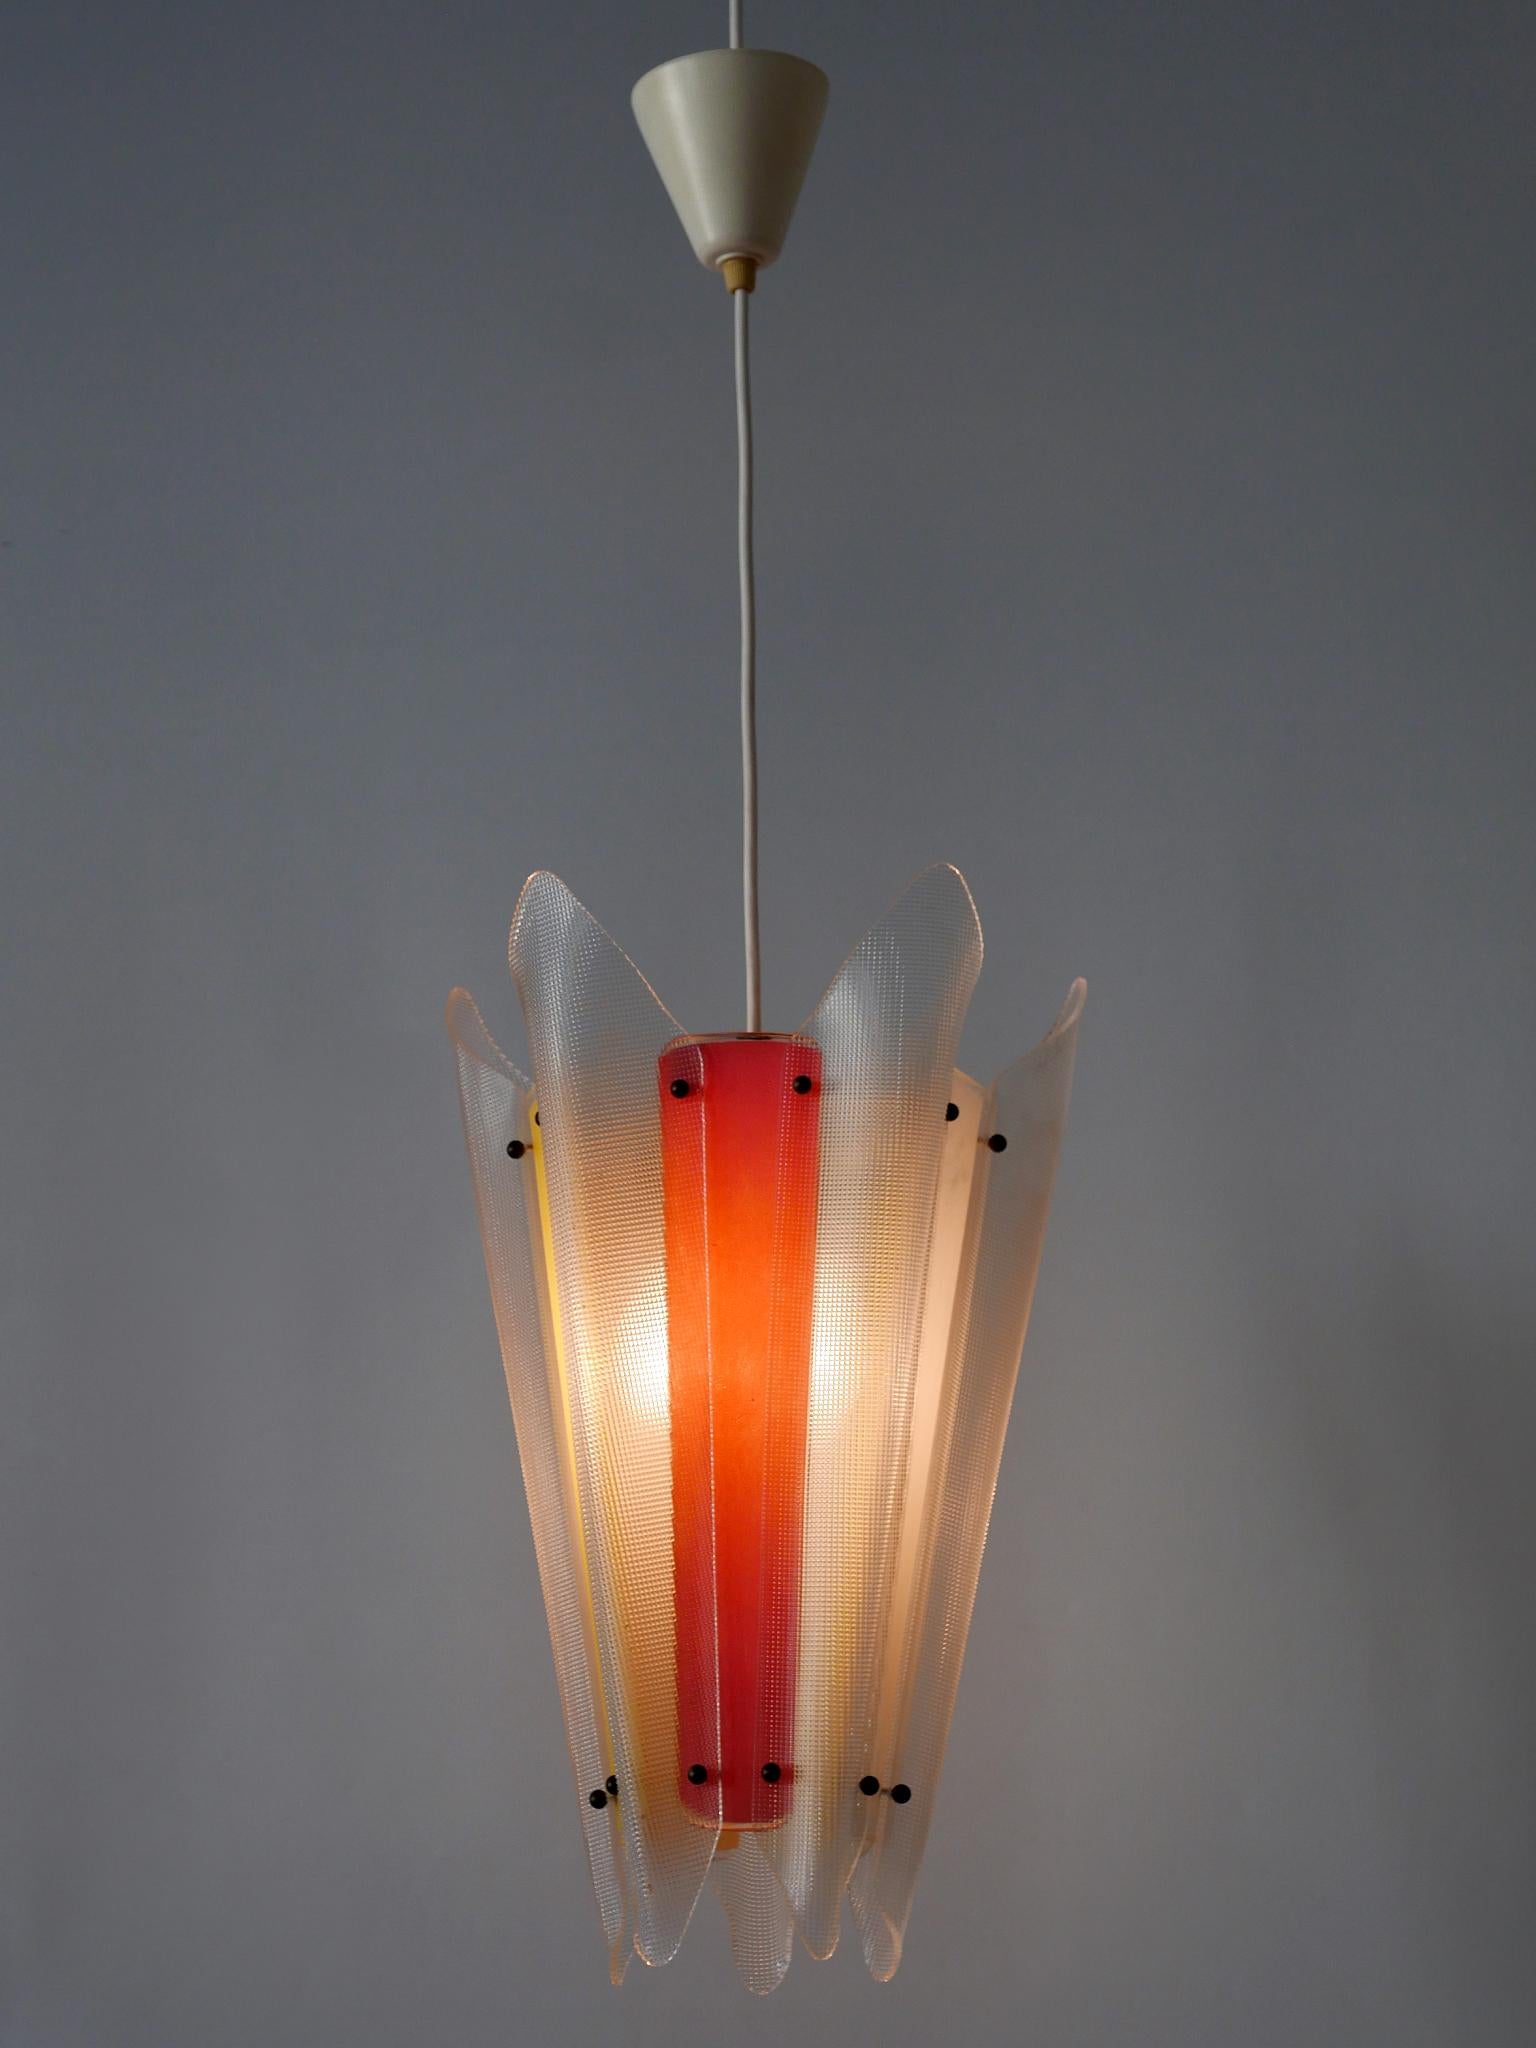 Rare Mid-Century Modern Multi-Colored Lucite Pendant Lamp Germany 1960s For Sale 3